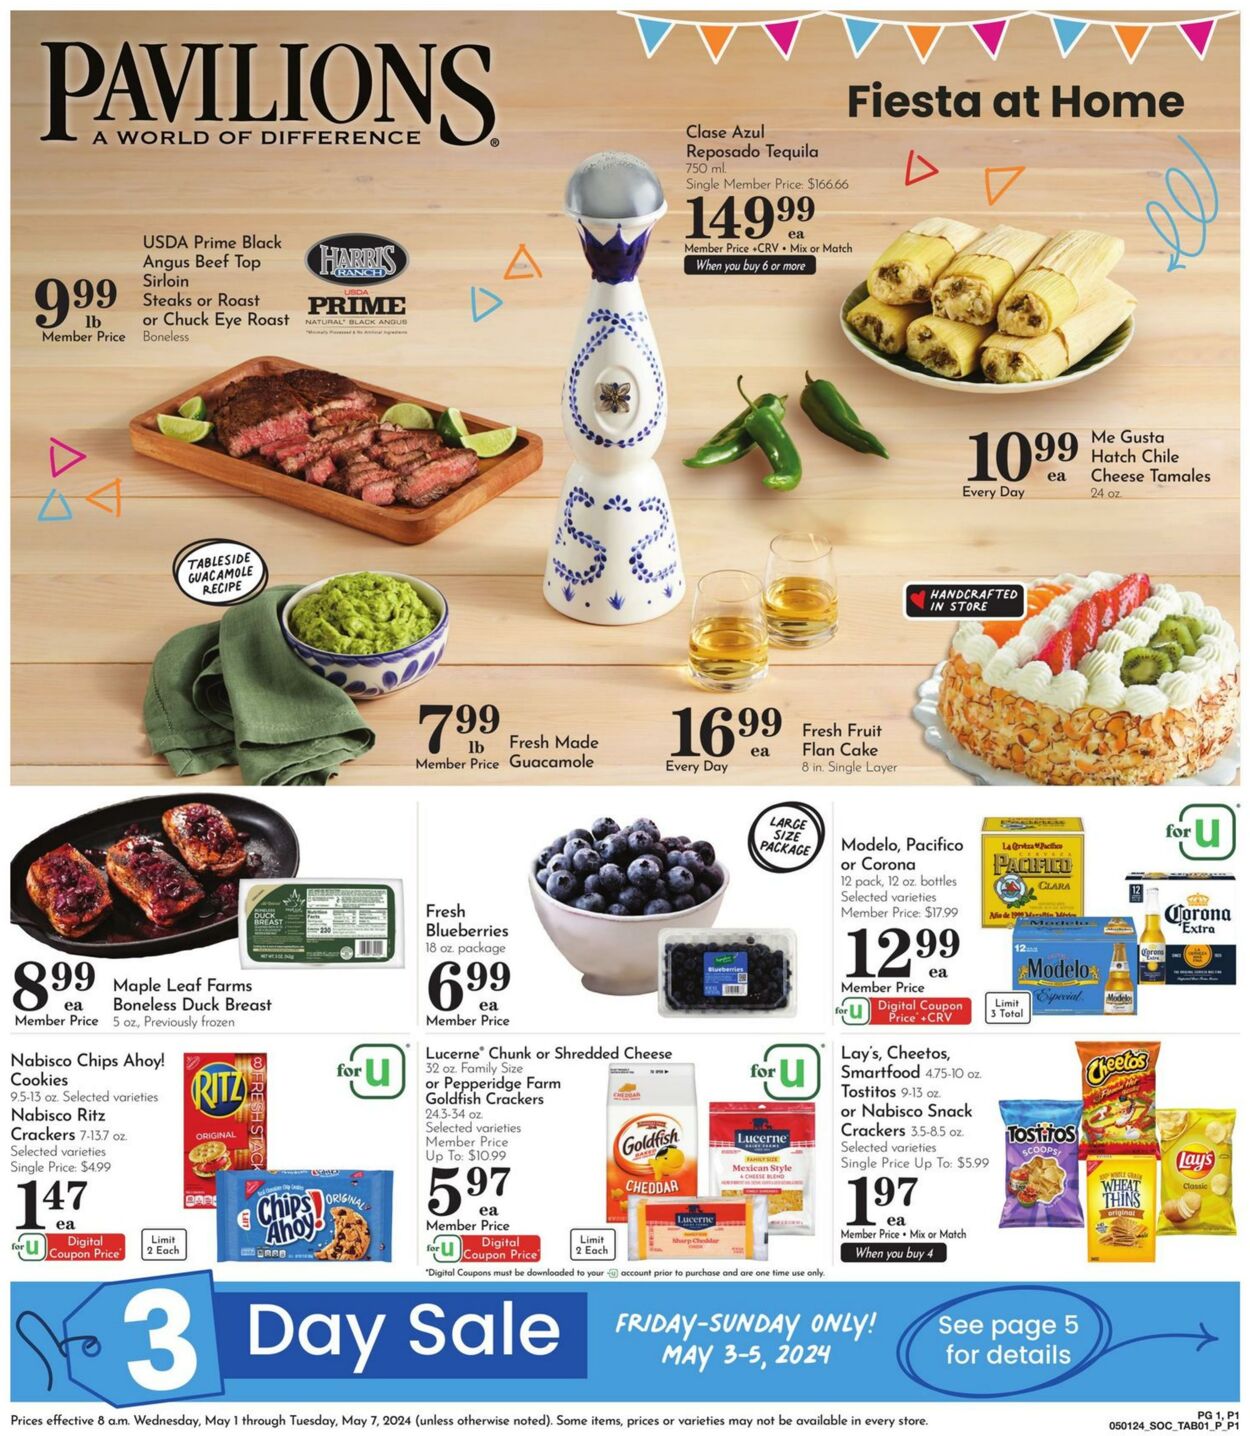 Pavilions Promotional weekly ads